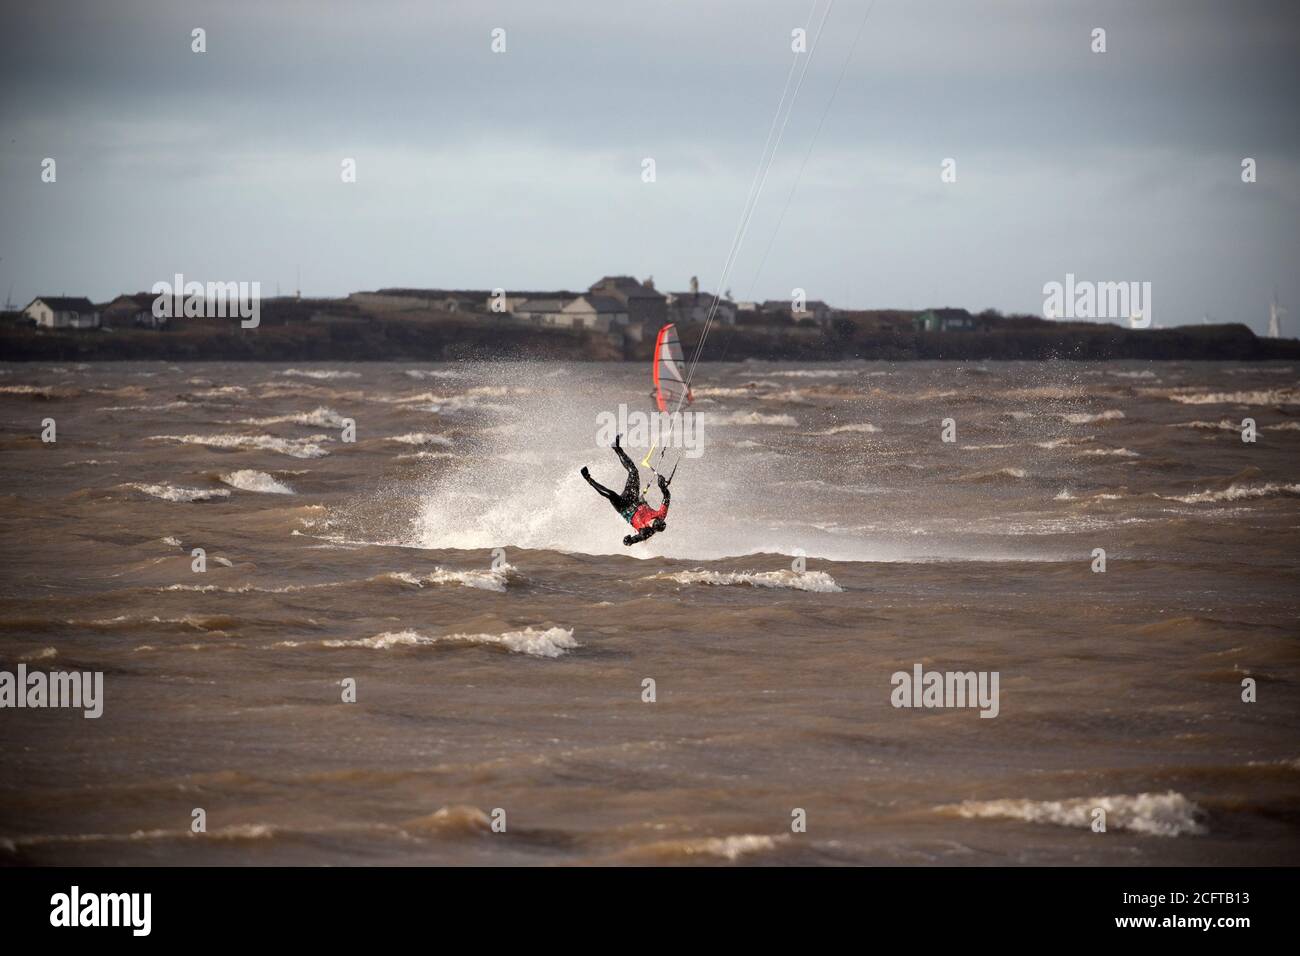 Kite Surfer Wiping Out in Rough Weather Stock Photo